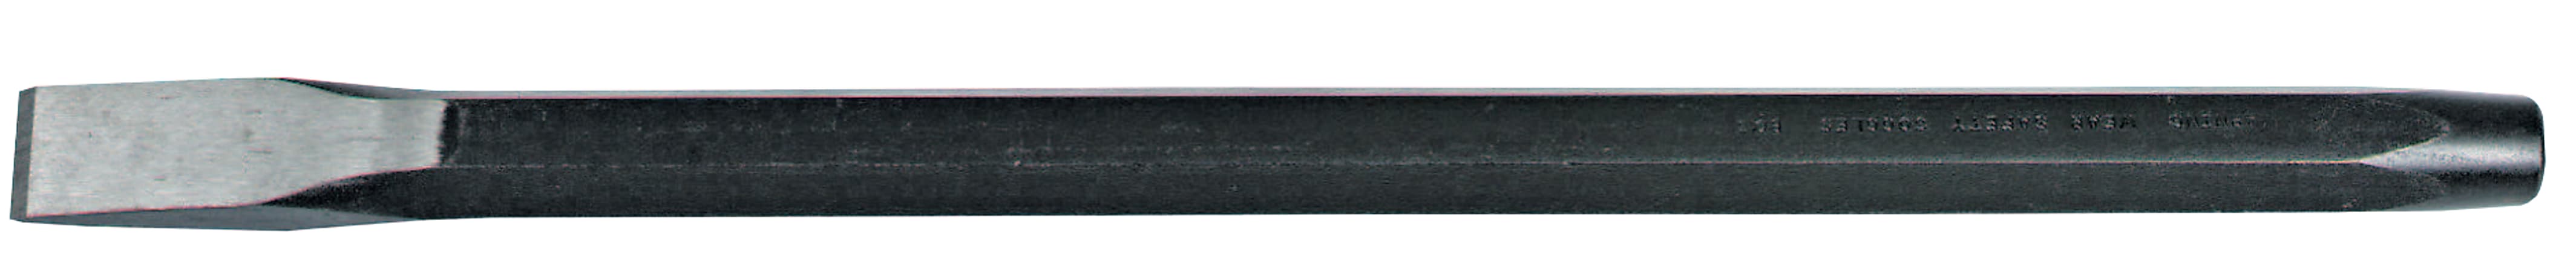 Cold Chisels, 8 in Long, 7/8 in Cut